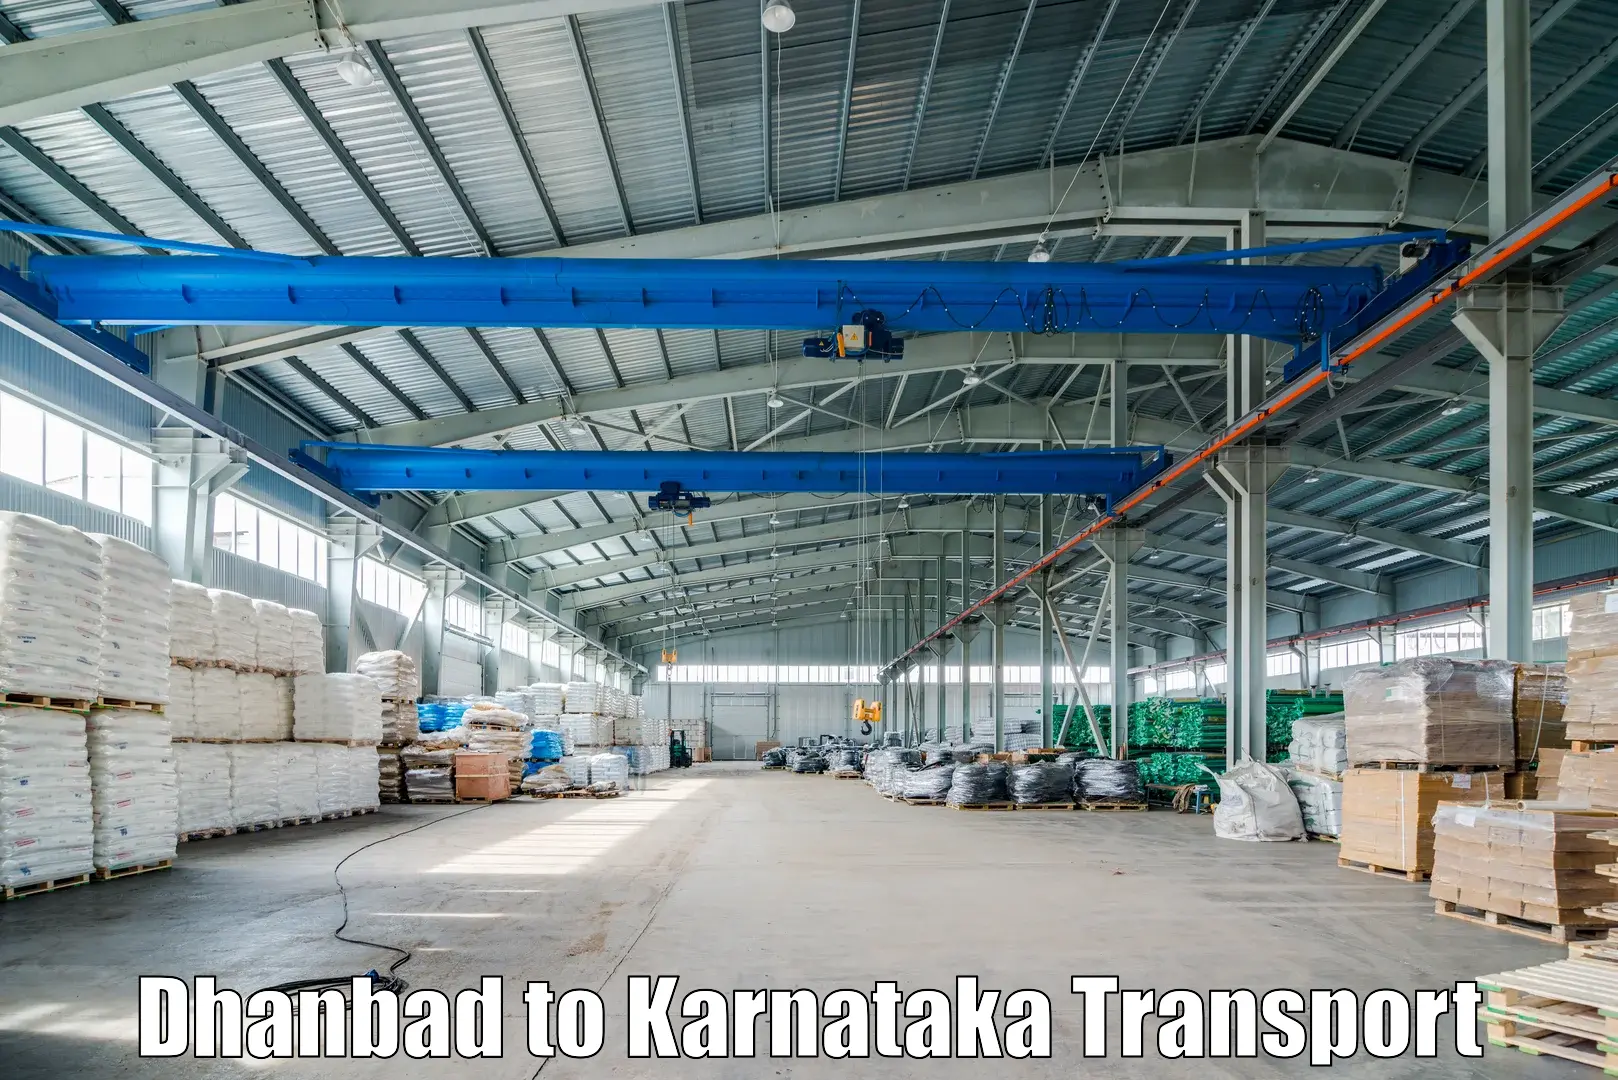 Land transport services Dhanbad to Yadgir